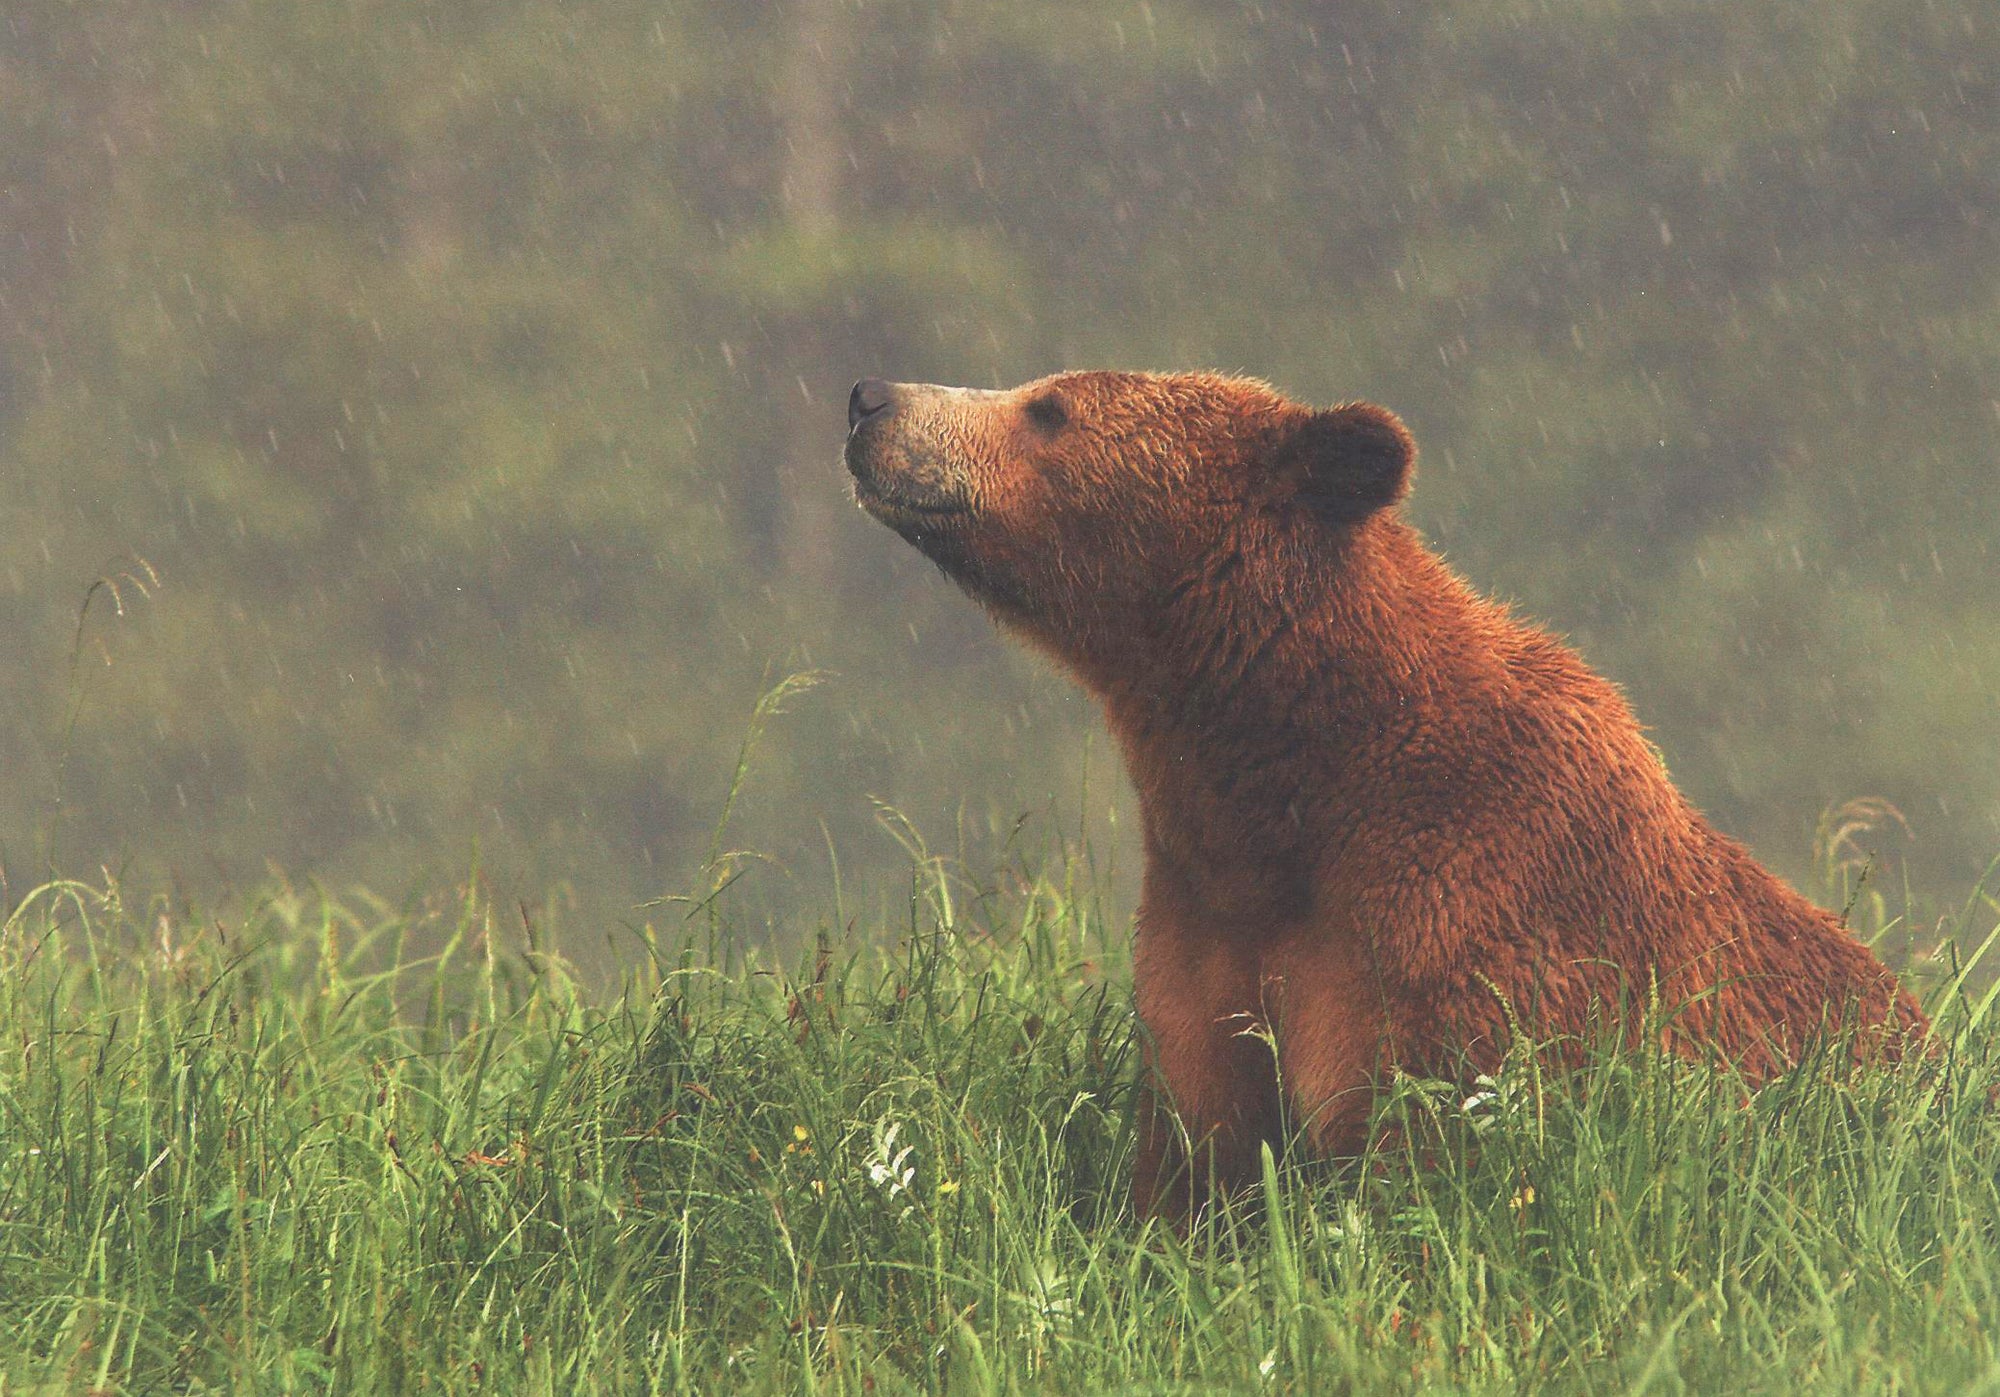 A photo of a grizzly bear sitting on a bed of grass in the rain. End of image description.